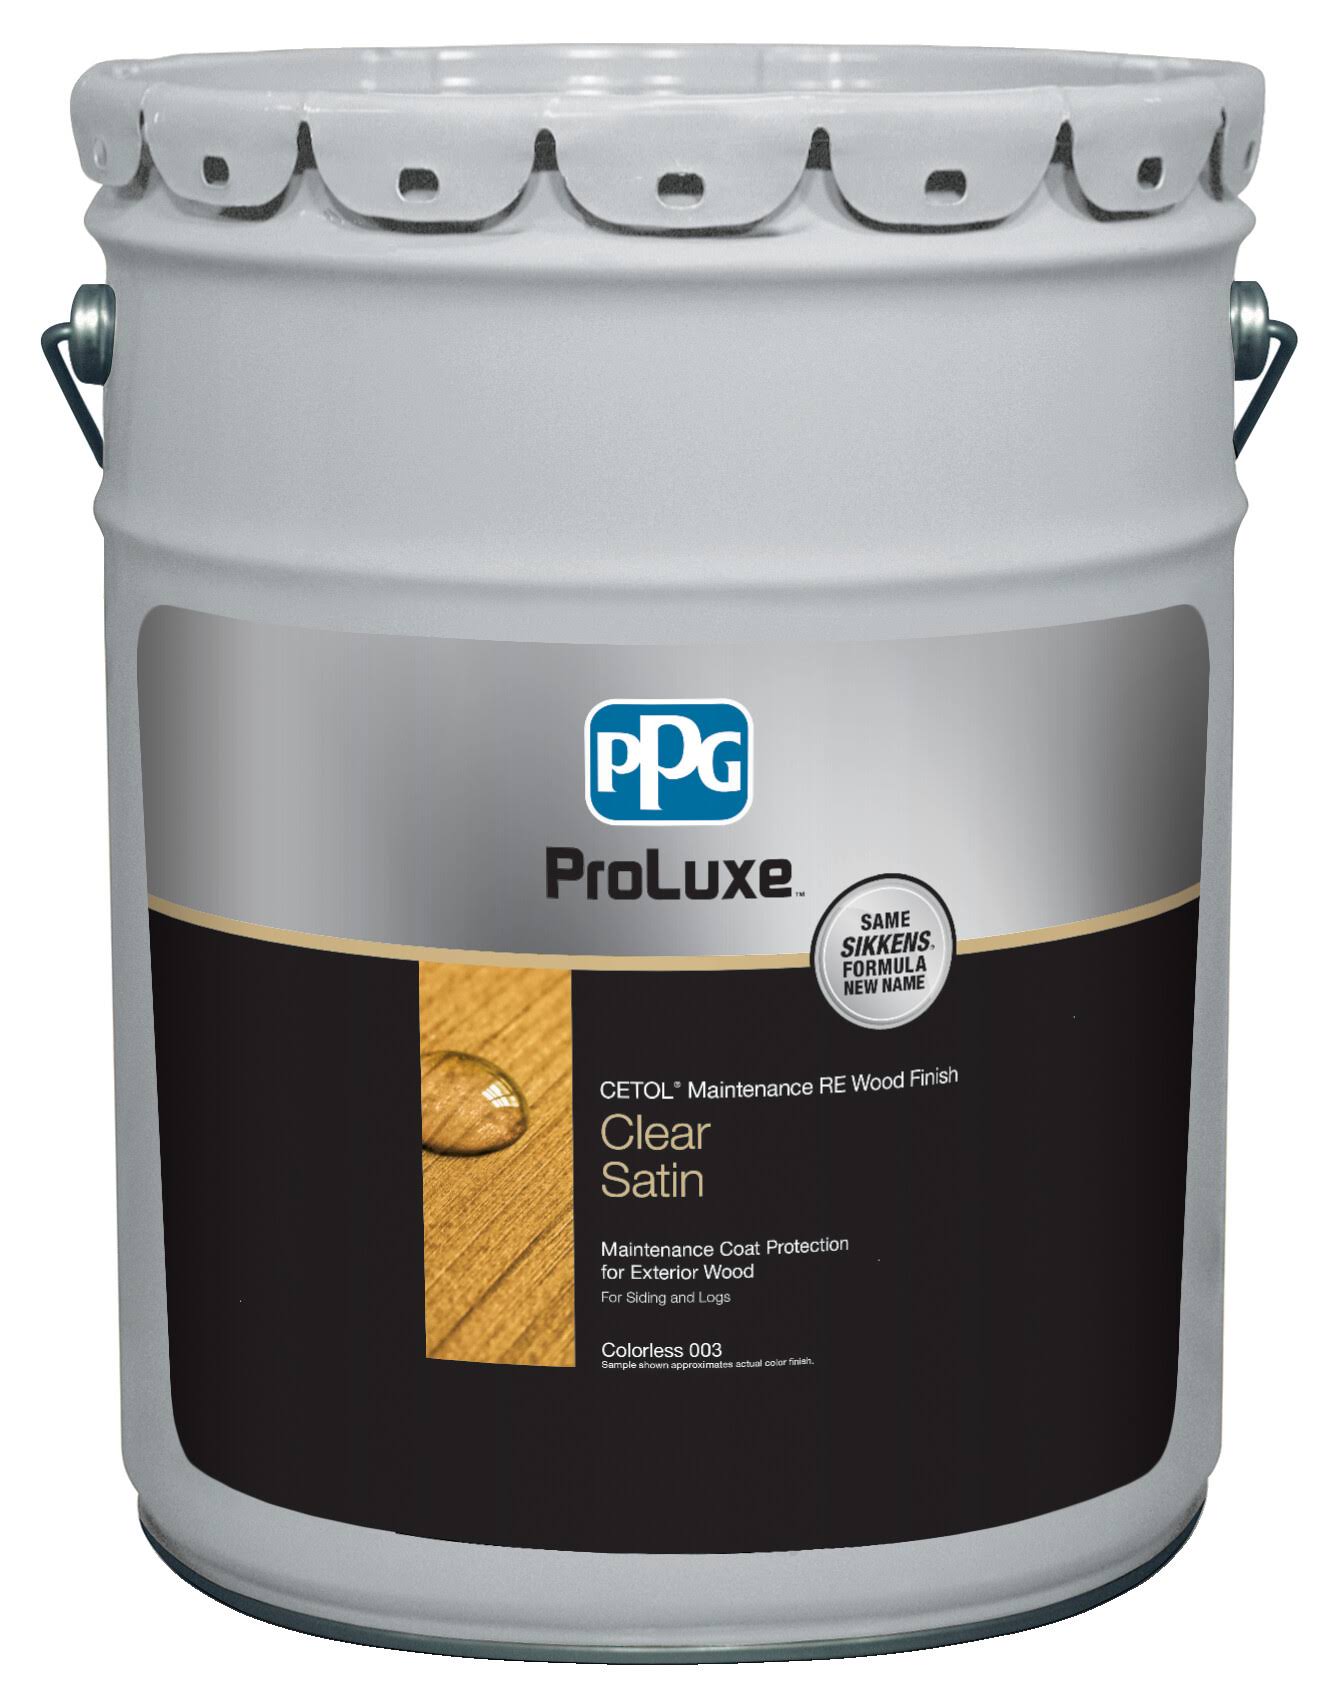 Sikkens Proluxe Cetol Maintenance 5 Gallons